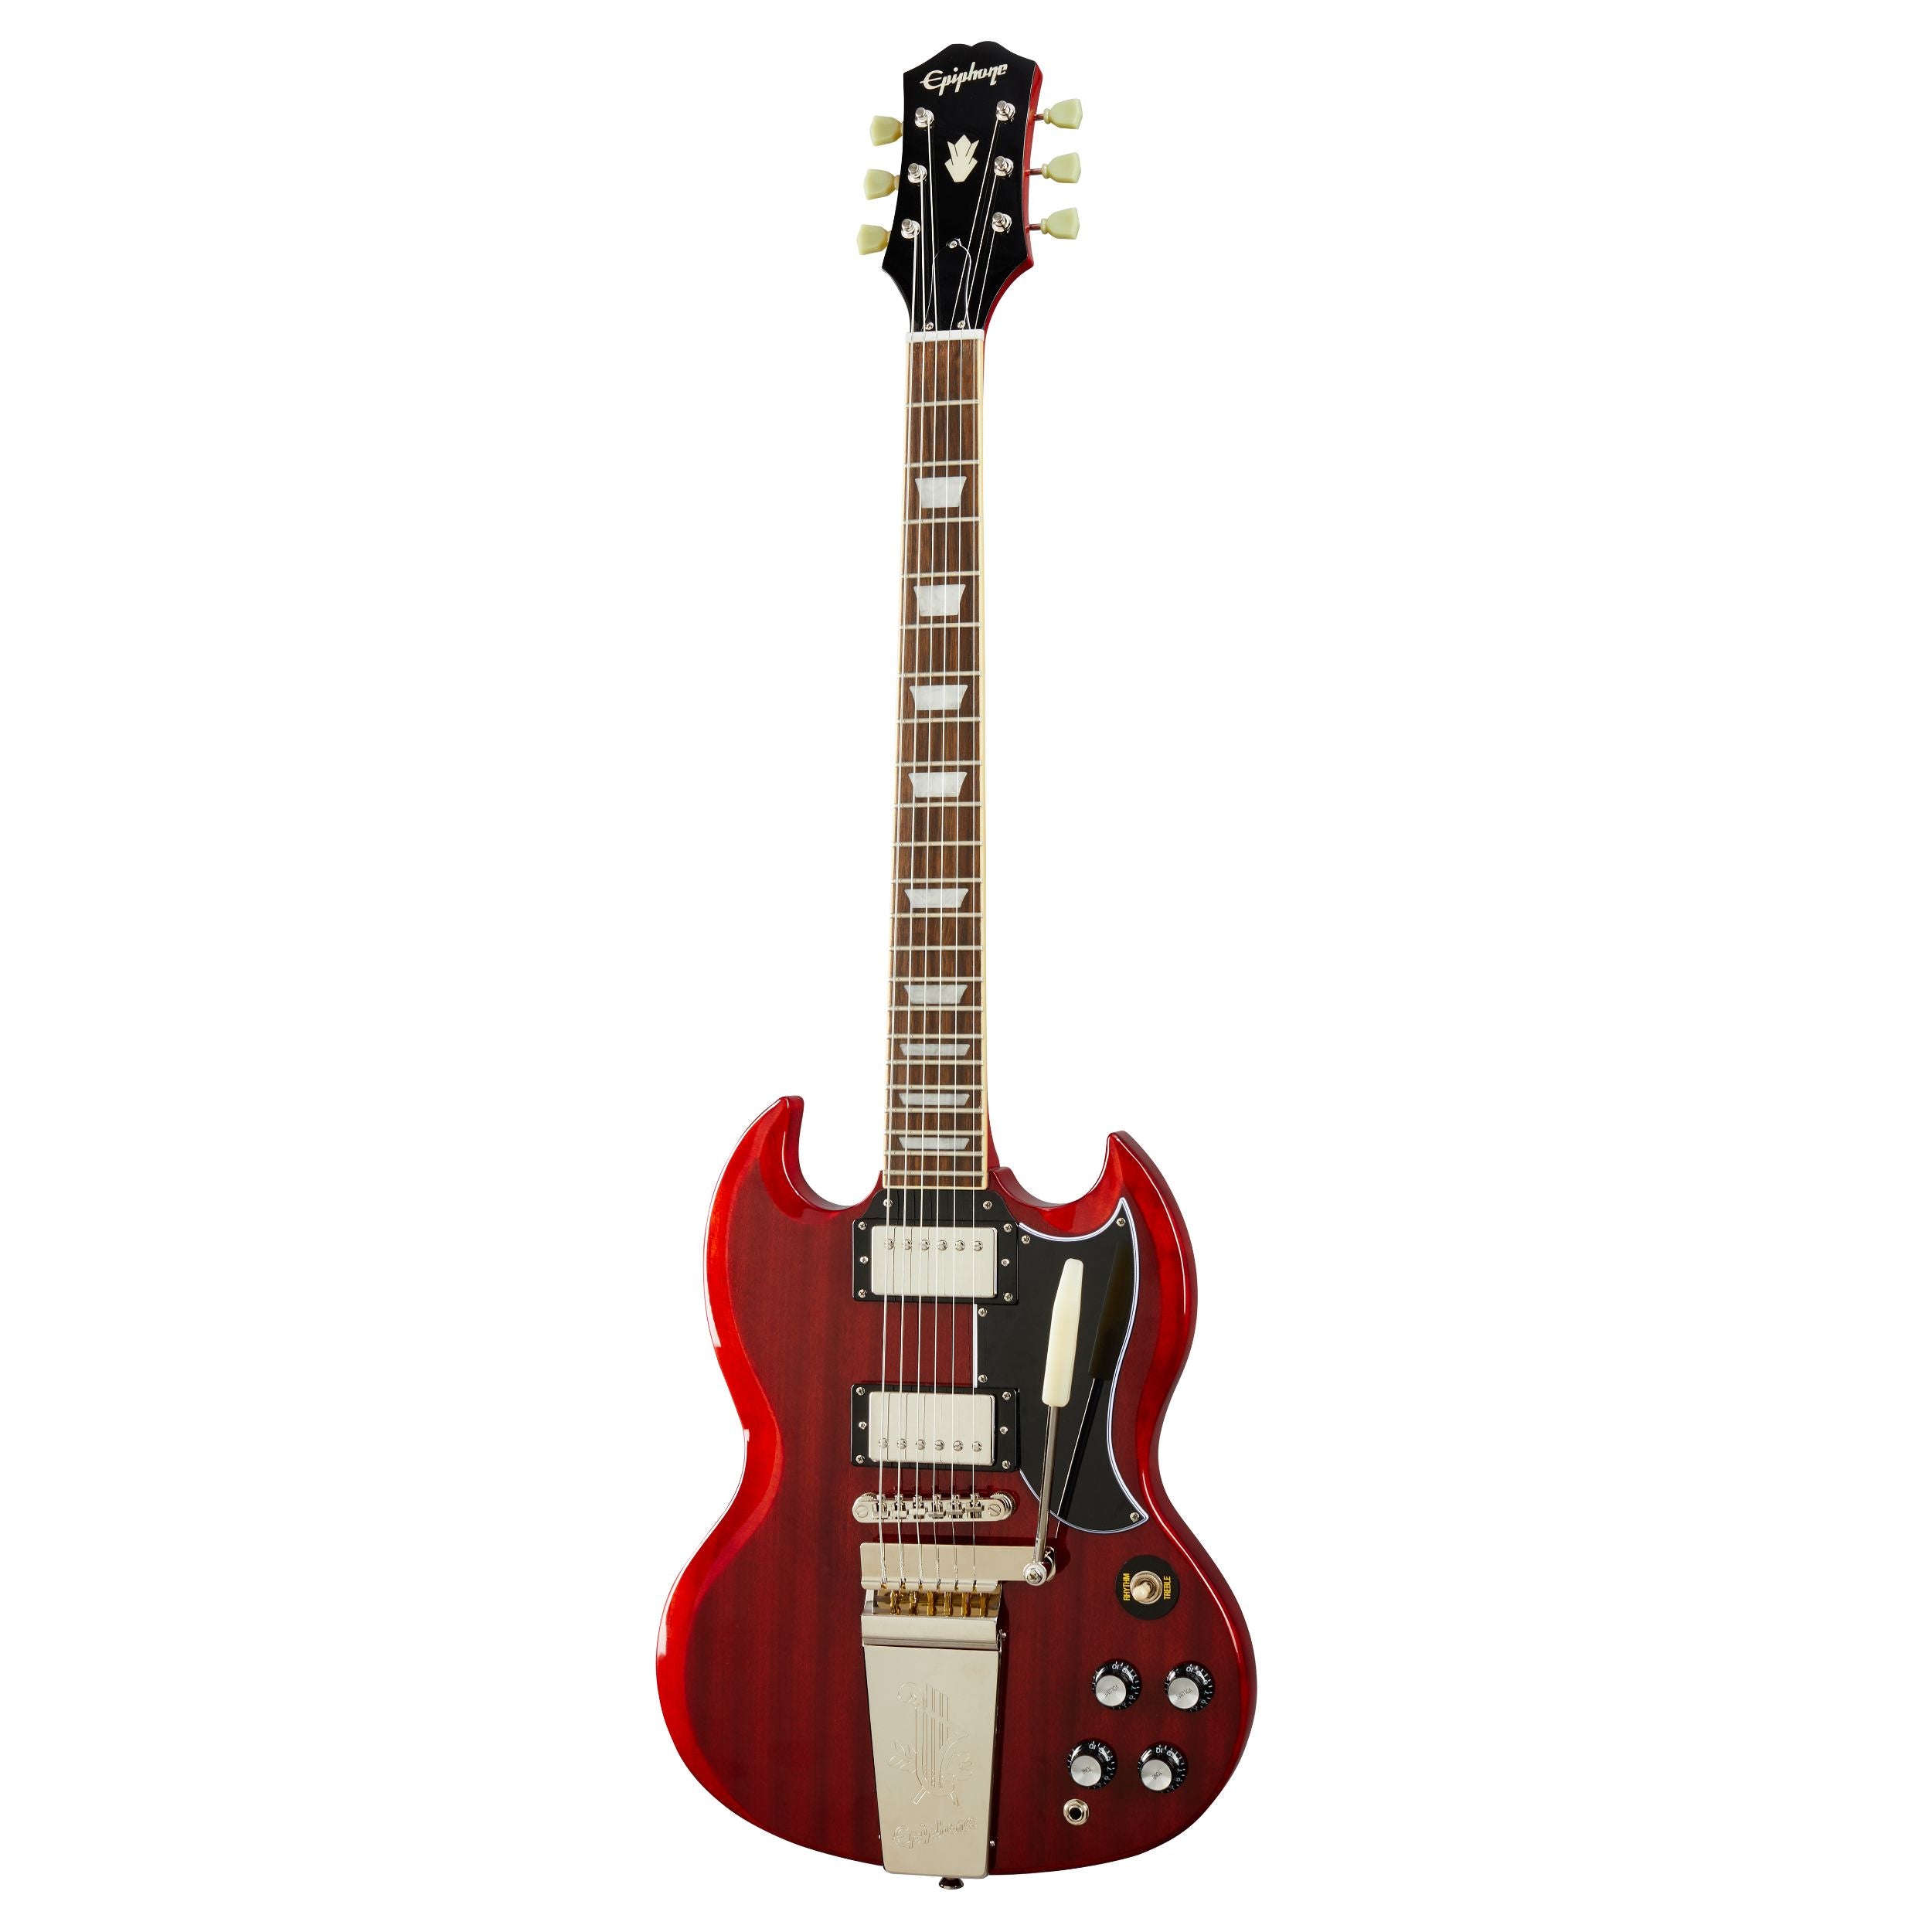 Epiphone SG Standard 60s Maestro Vibrola, Vintage Cherry - Inspired by Gibson